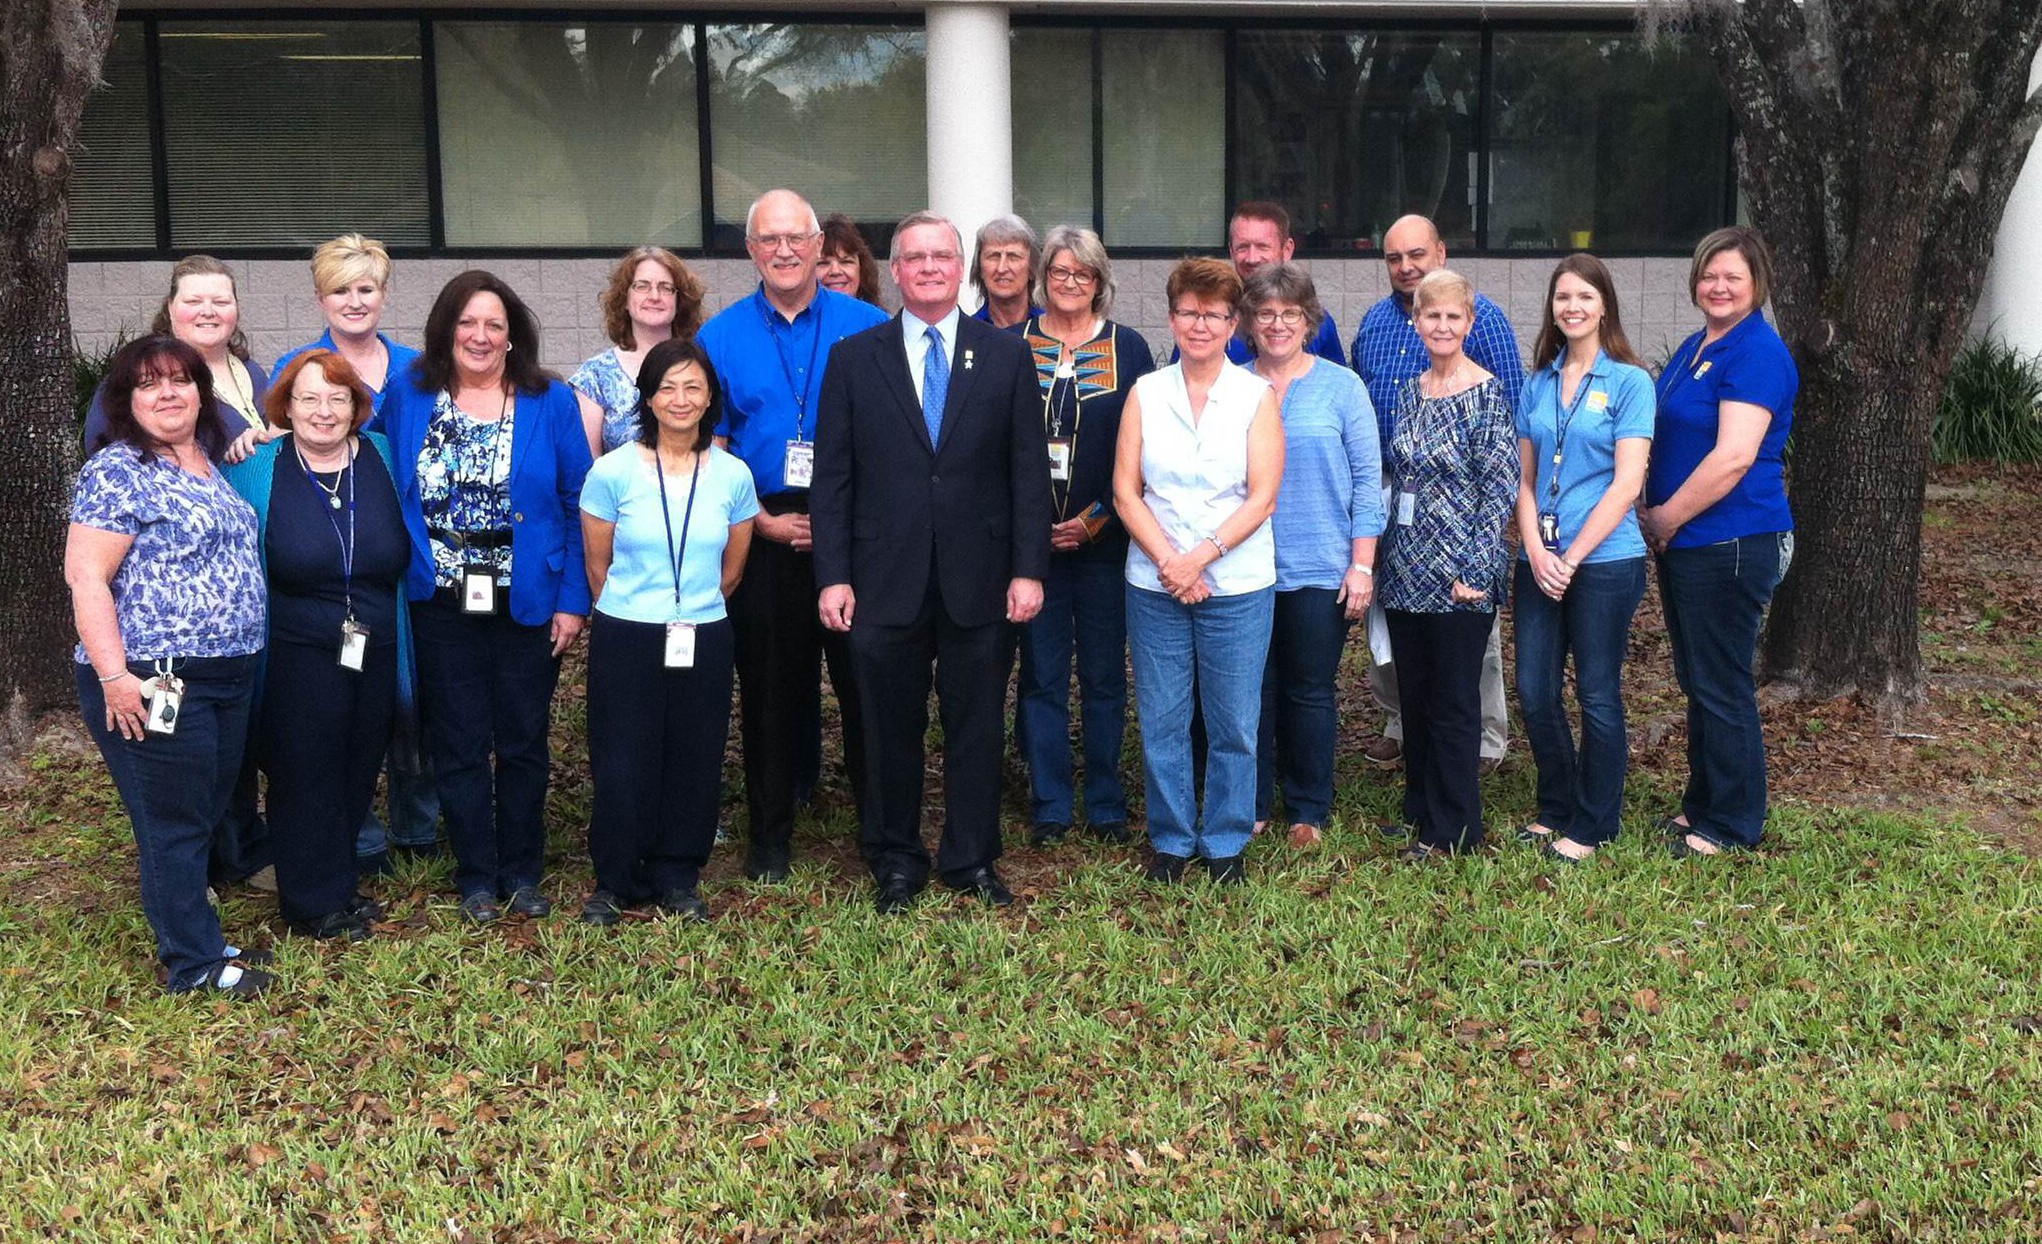 Dr. Armstrong and DOH-Marion staff dressed in blue 